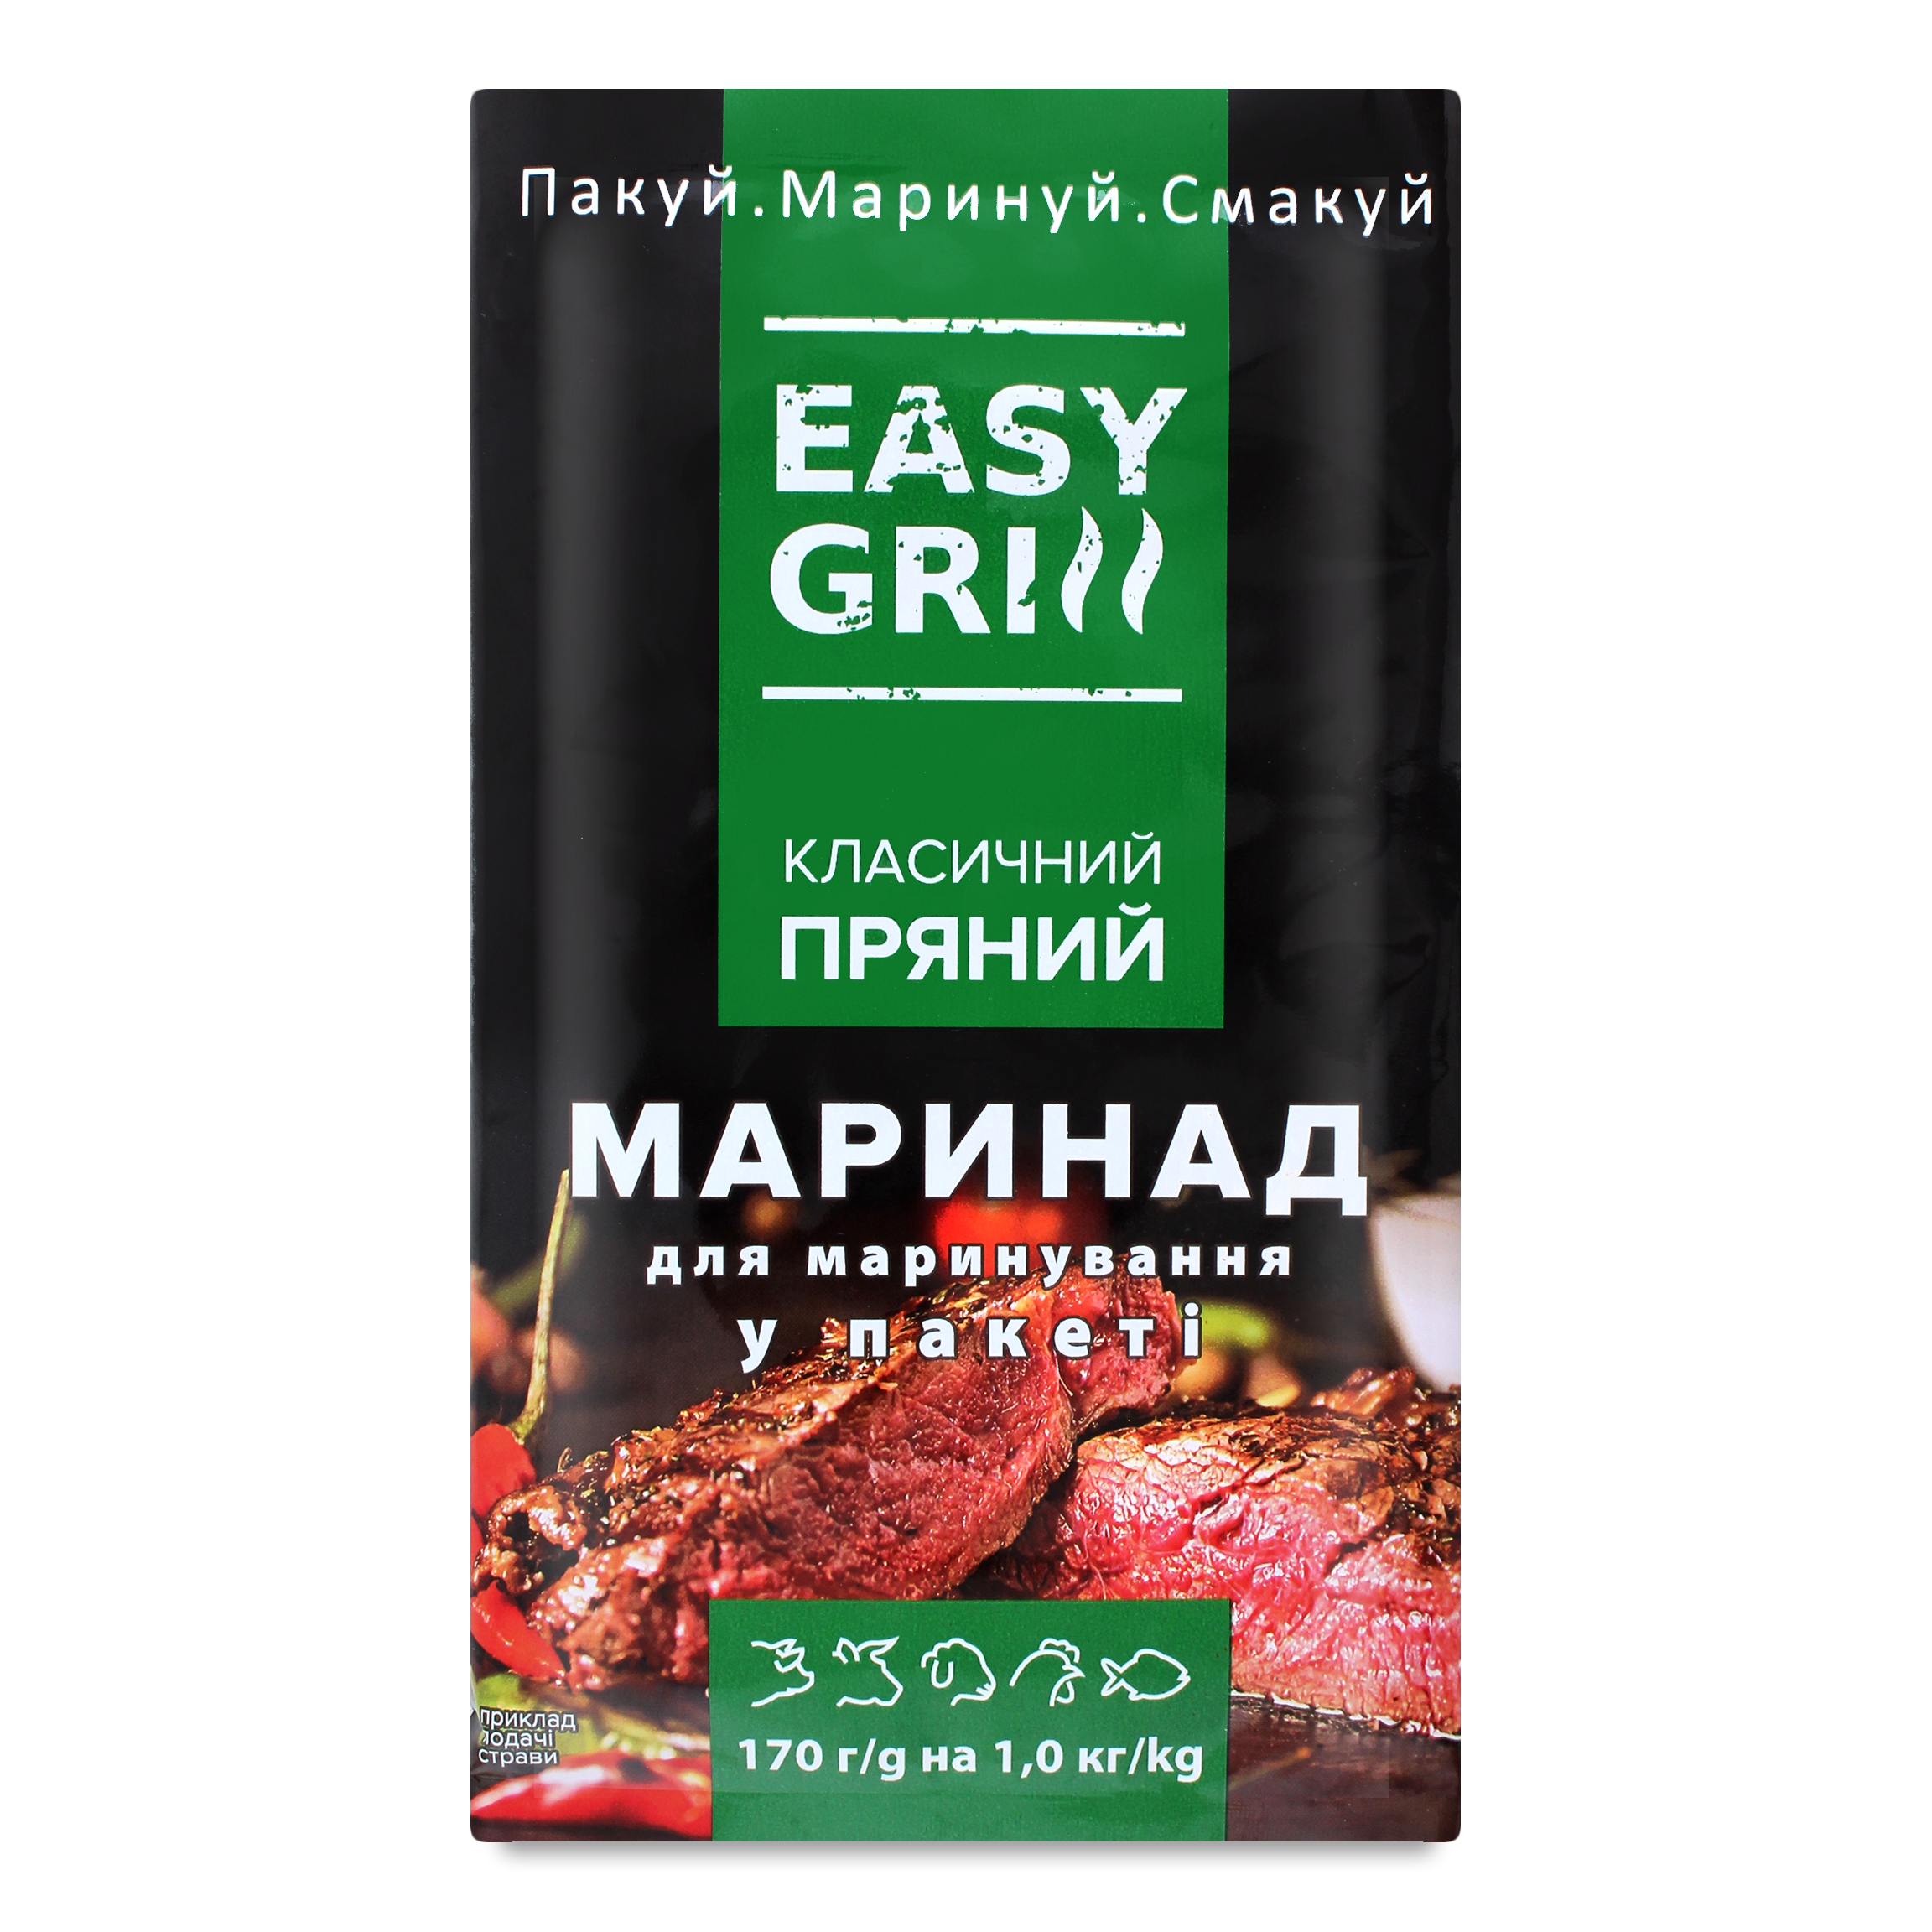 Easy Grill Marinade Classic spicy 170g